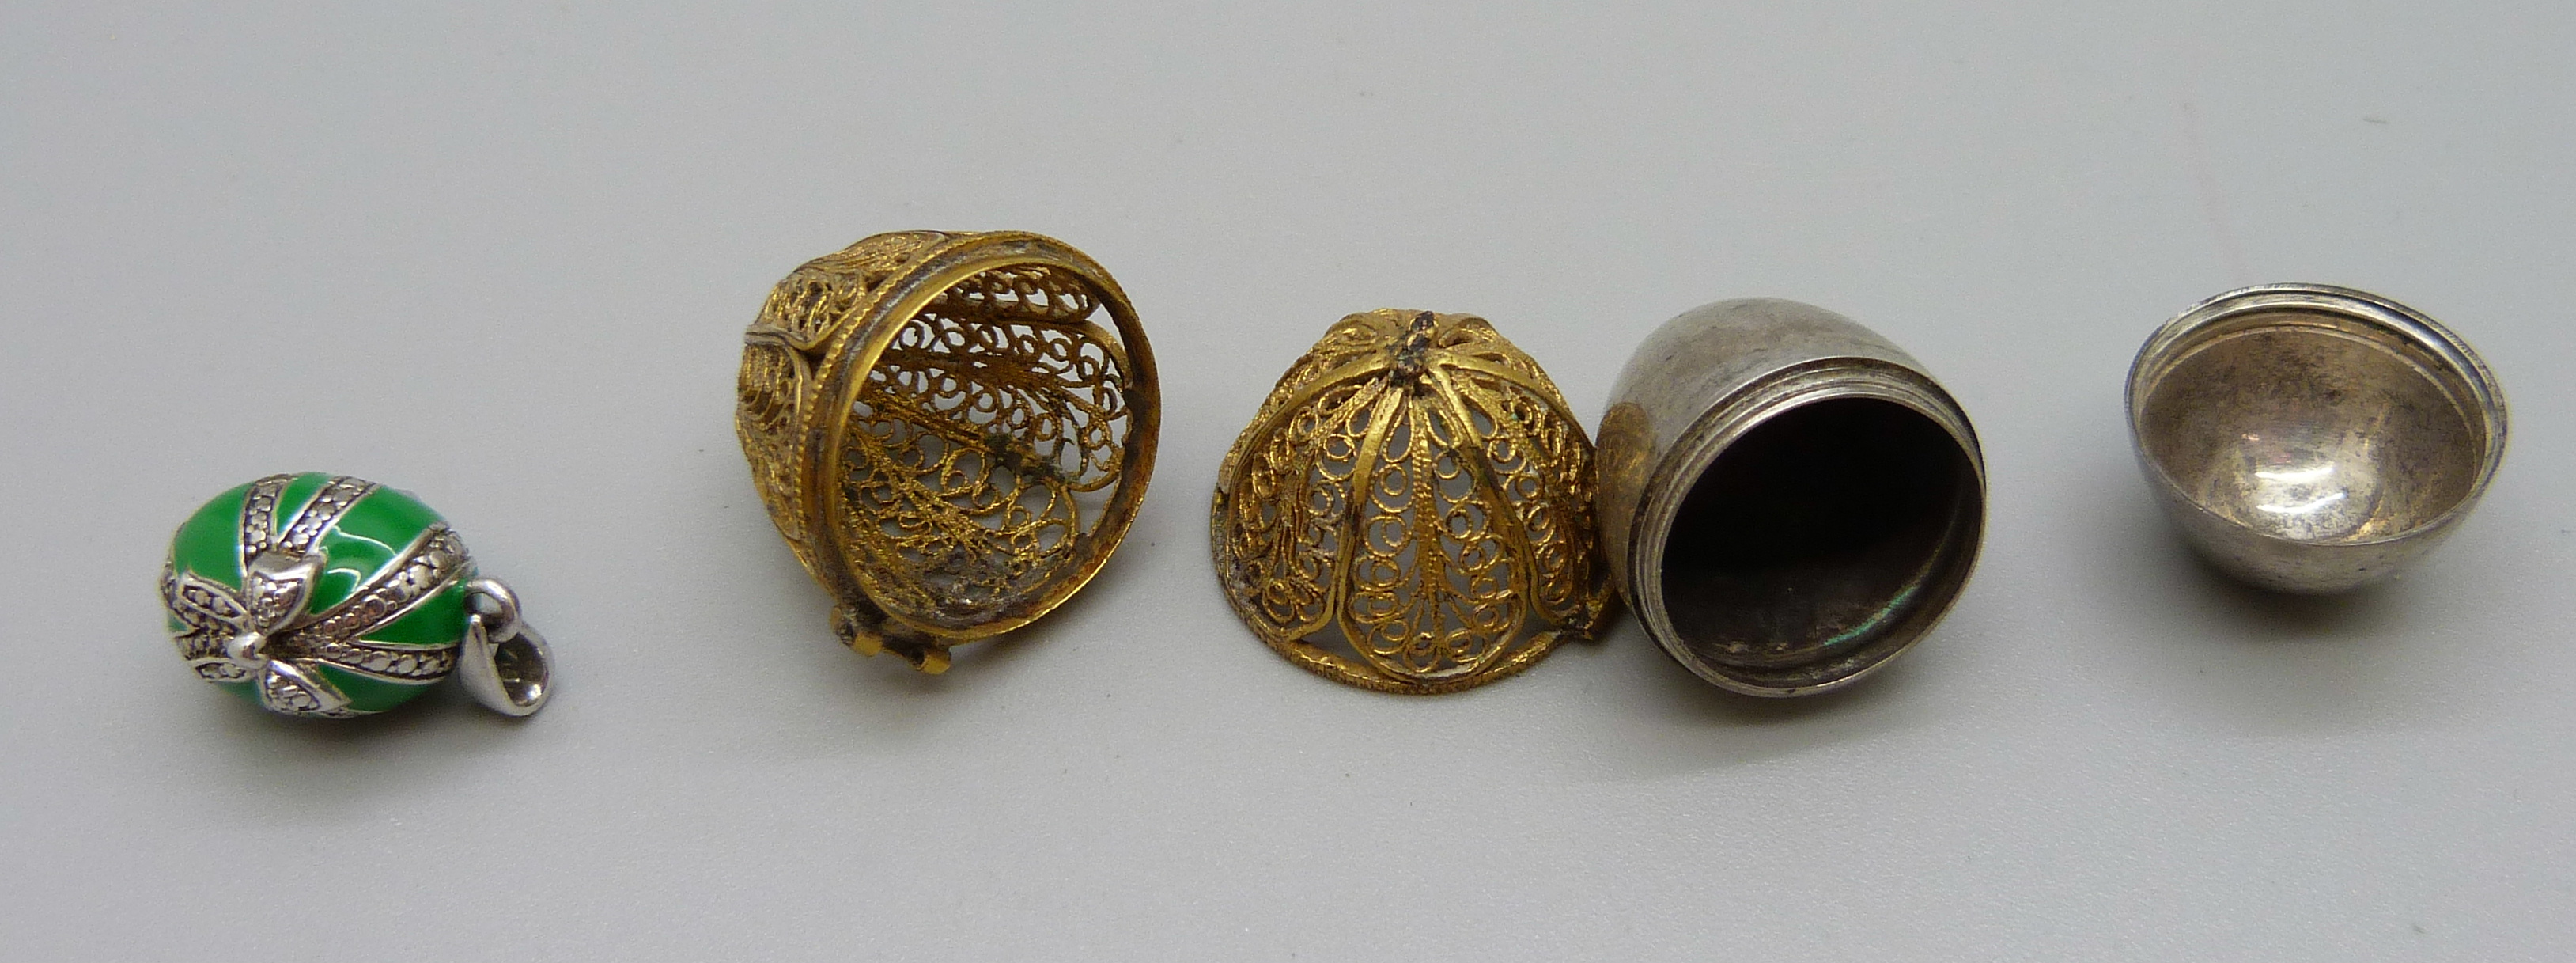 A silver gilt filigree egg thimble holder, hinge requires repair and a silver mounted pendant - Image 2 of 2